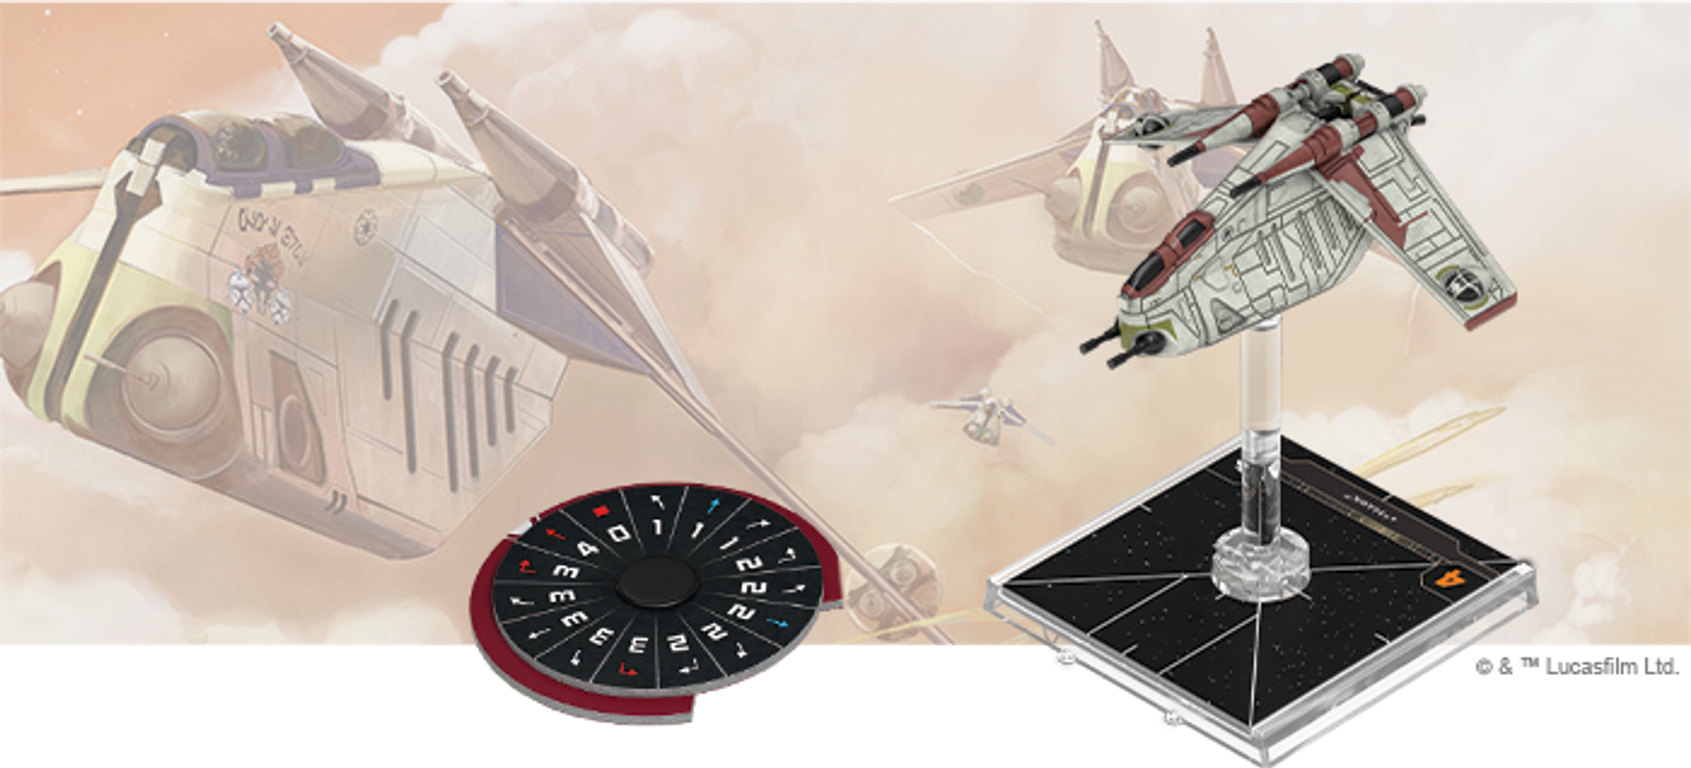 Star Wars: X-Wing (Second Edition) – LAAT/i Gunship Expansion Pack miniature